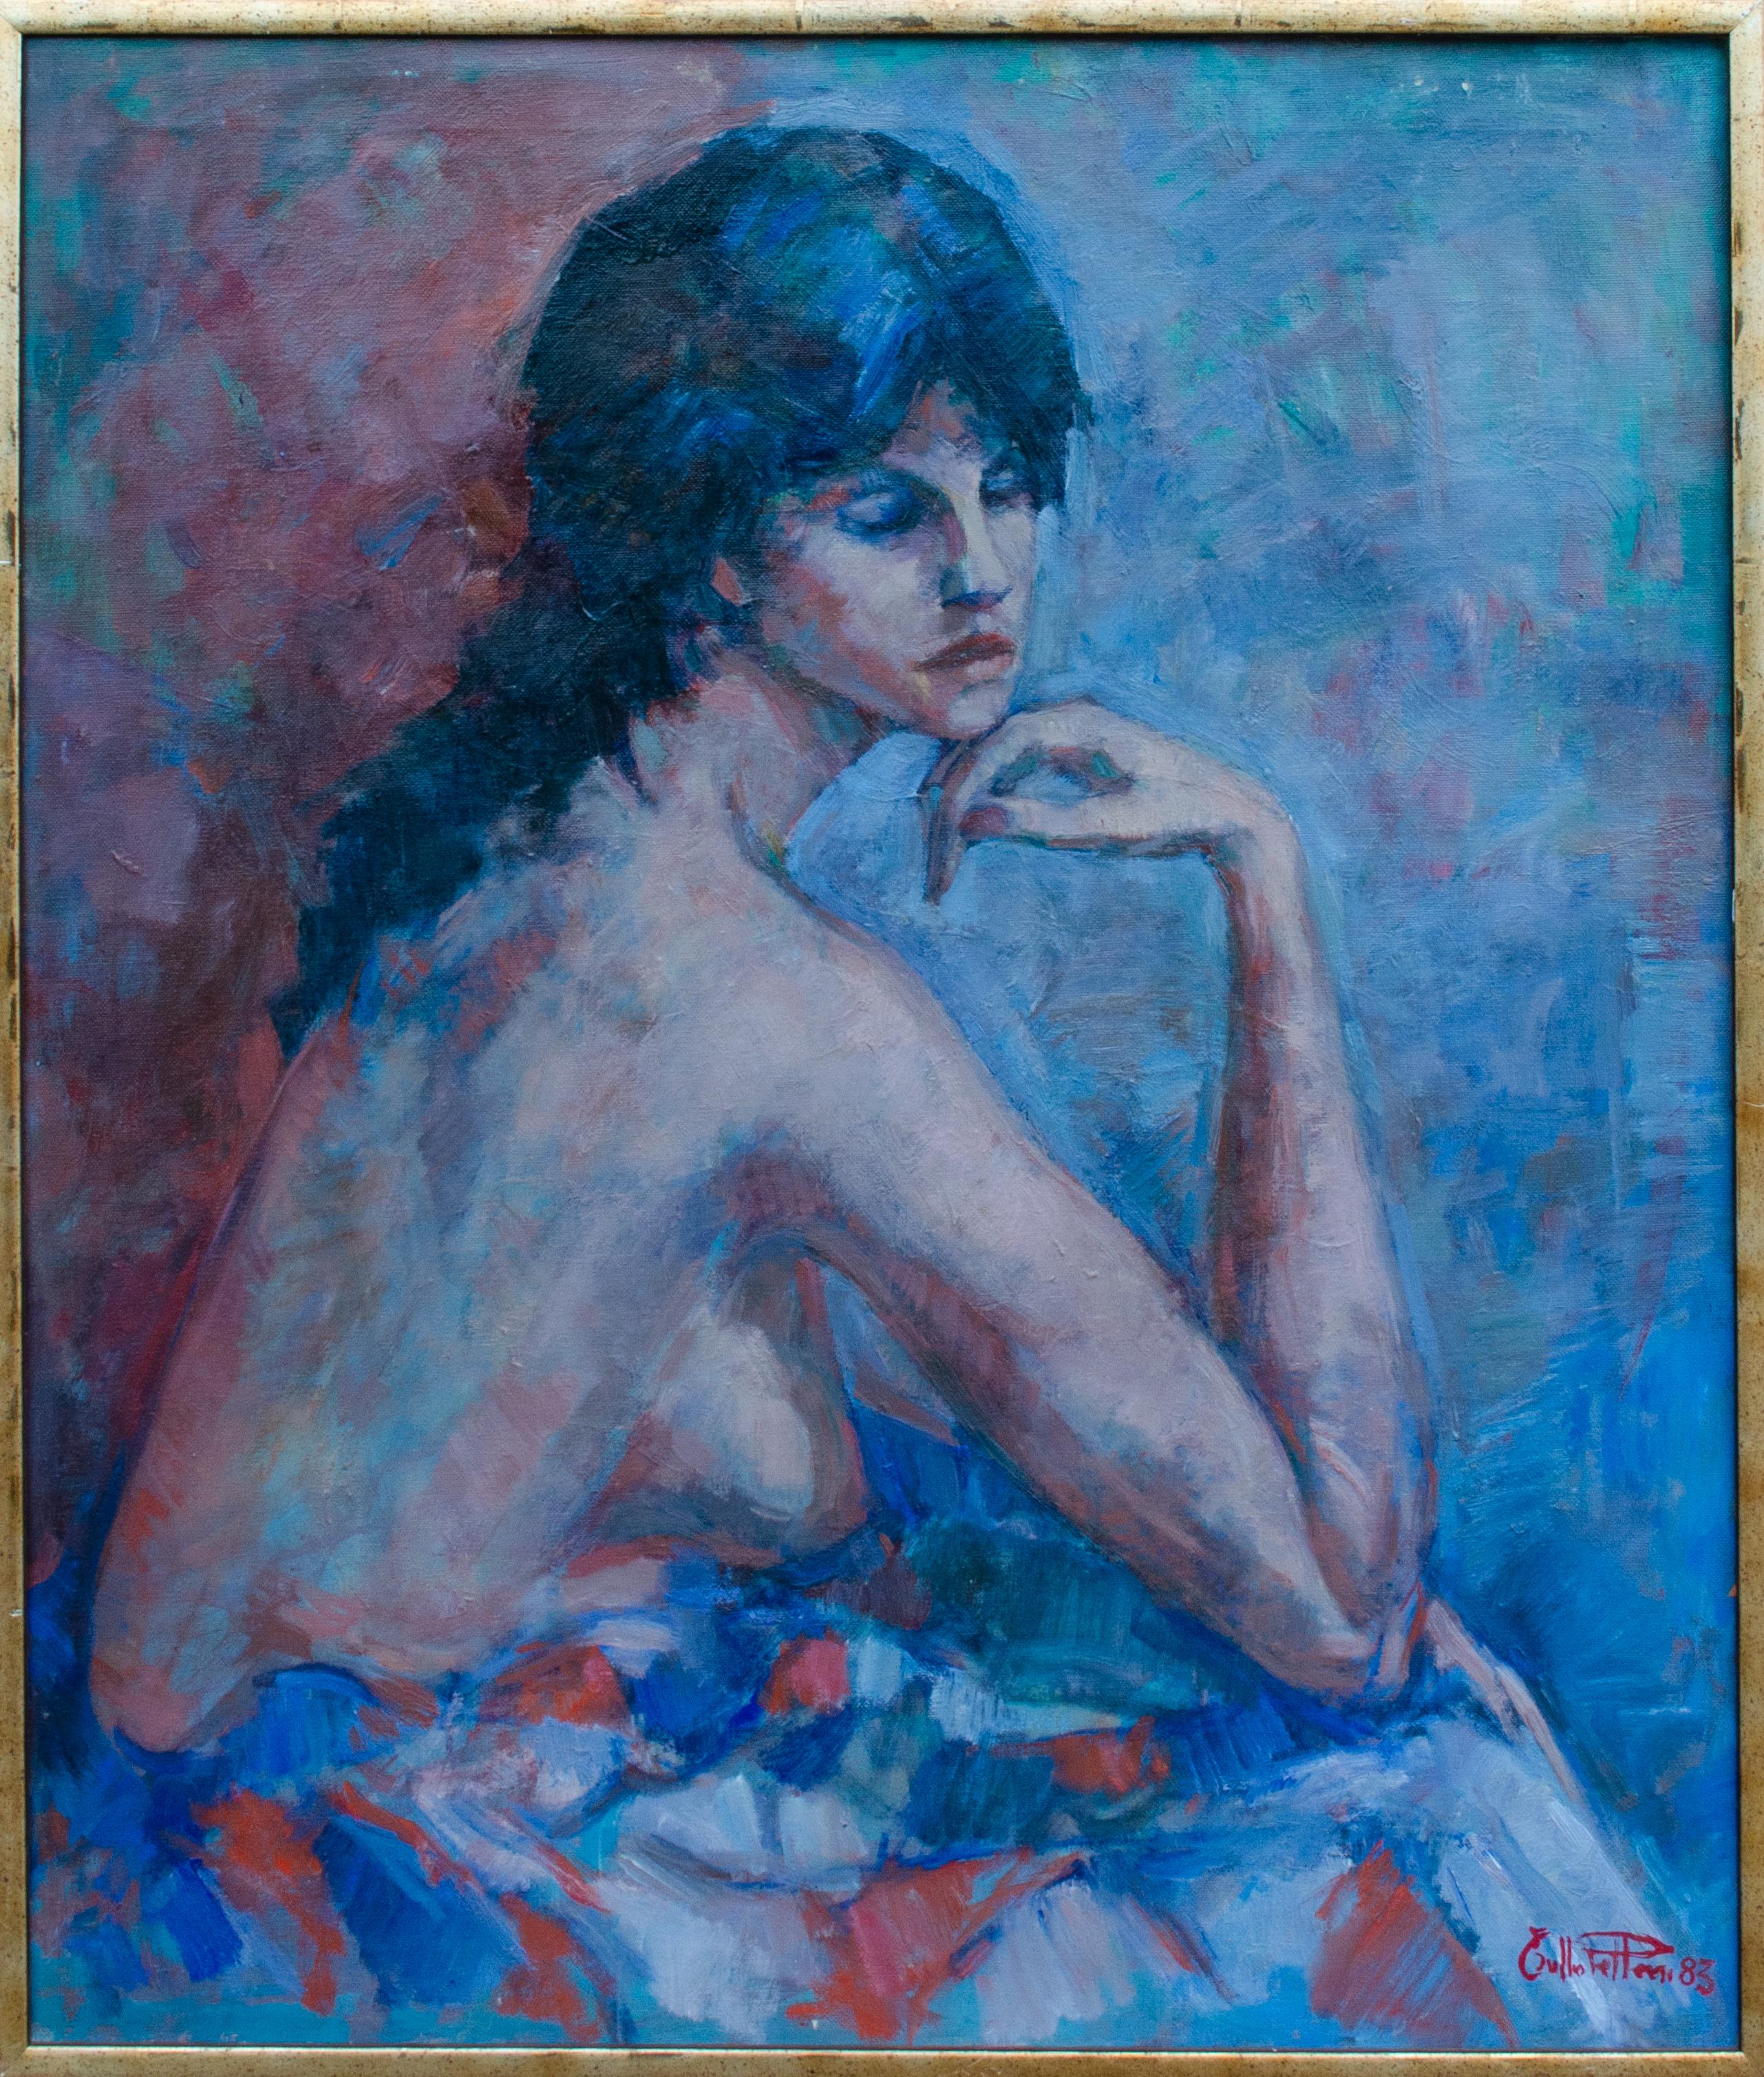 Unknown Portrait Painting - Mystery Modernist Italian Artist Portrait of a Topless Woman